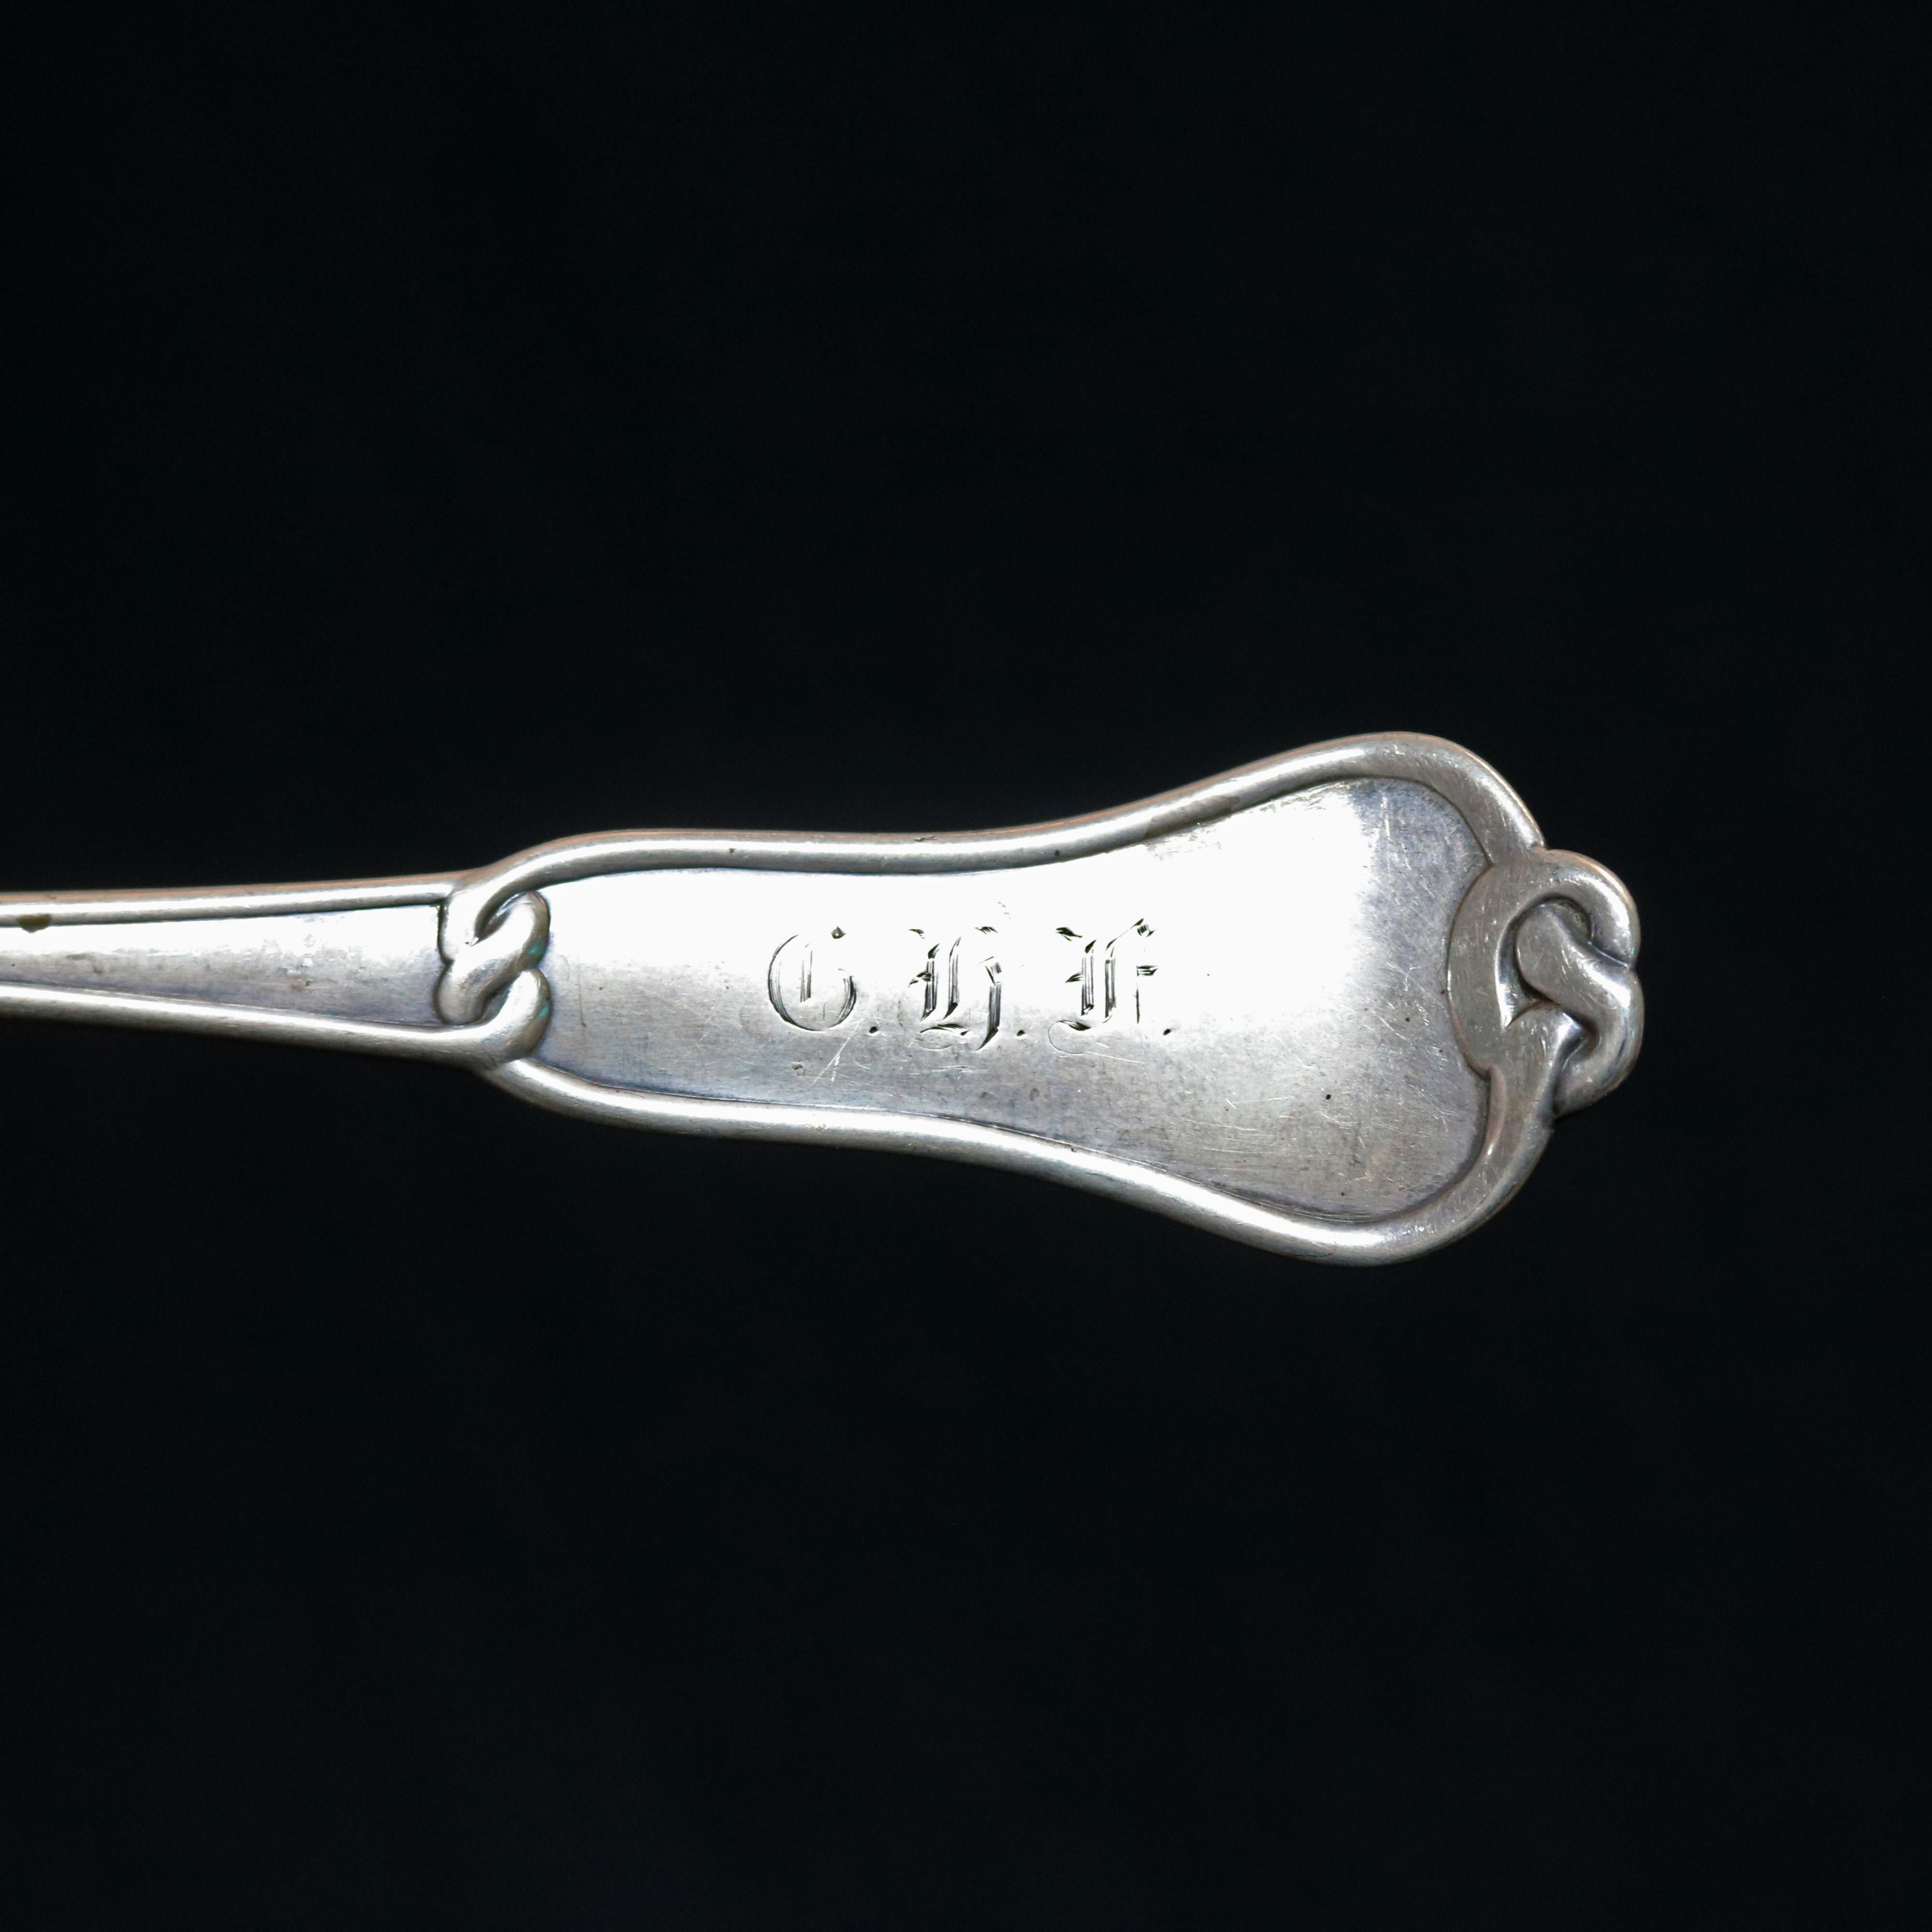 American Antique Tiffany & Co. Sterling Silver Basting Spoon with Pretzel Finial